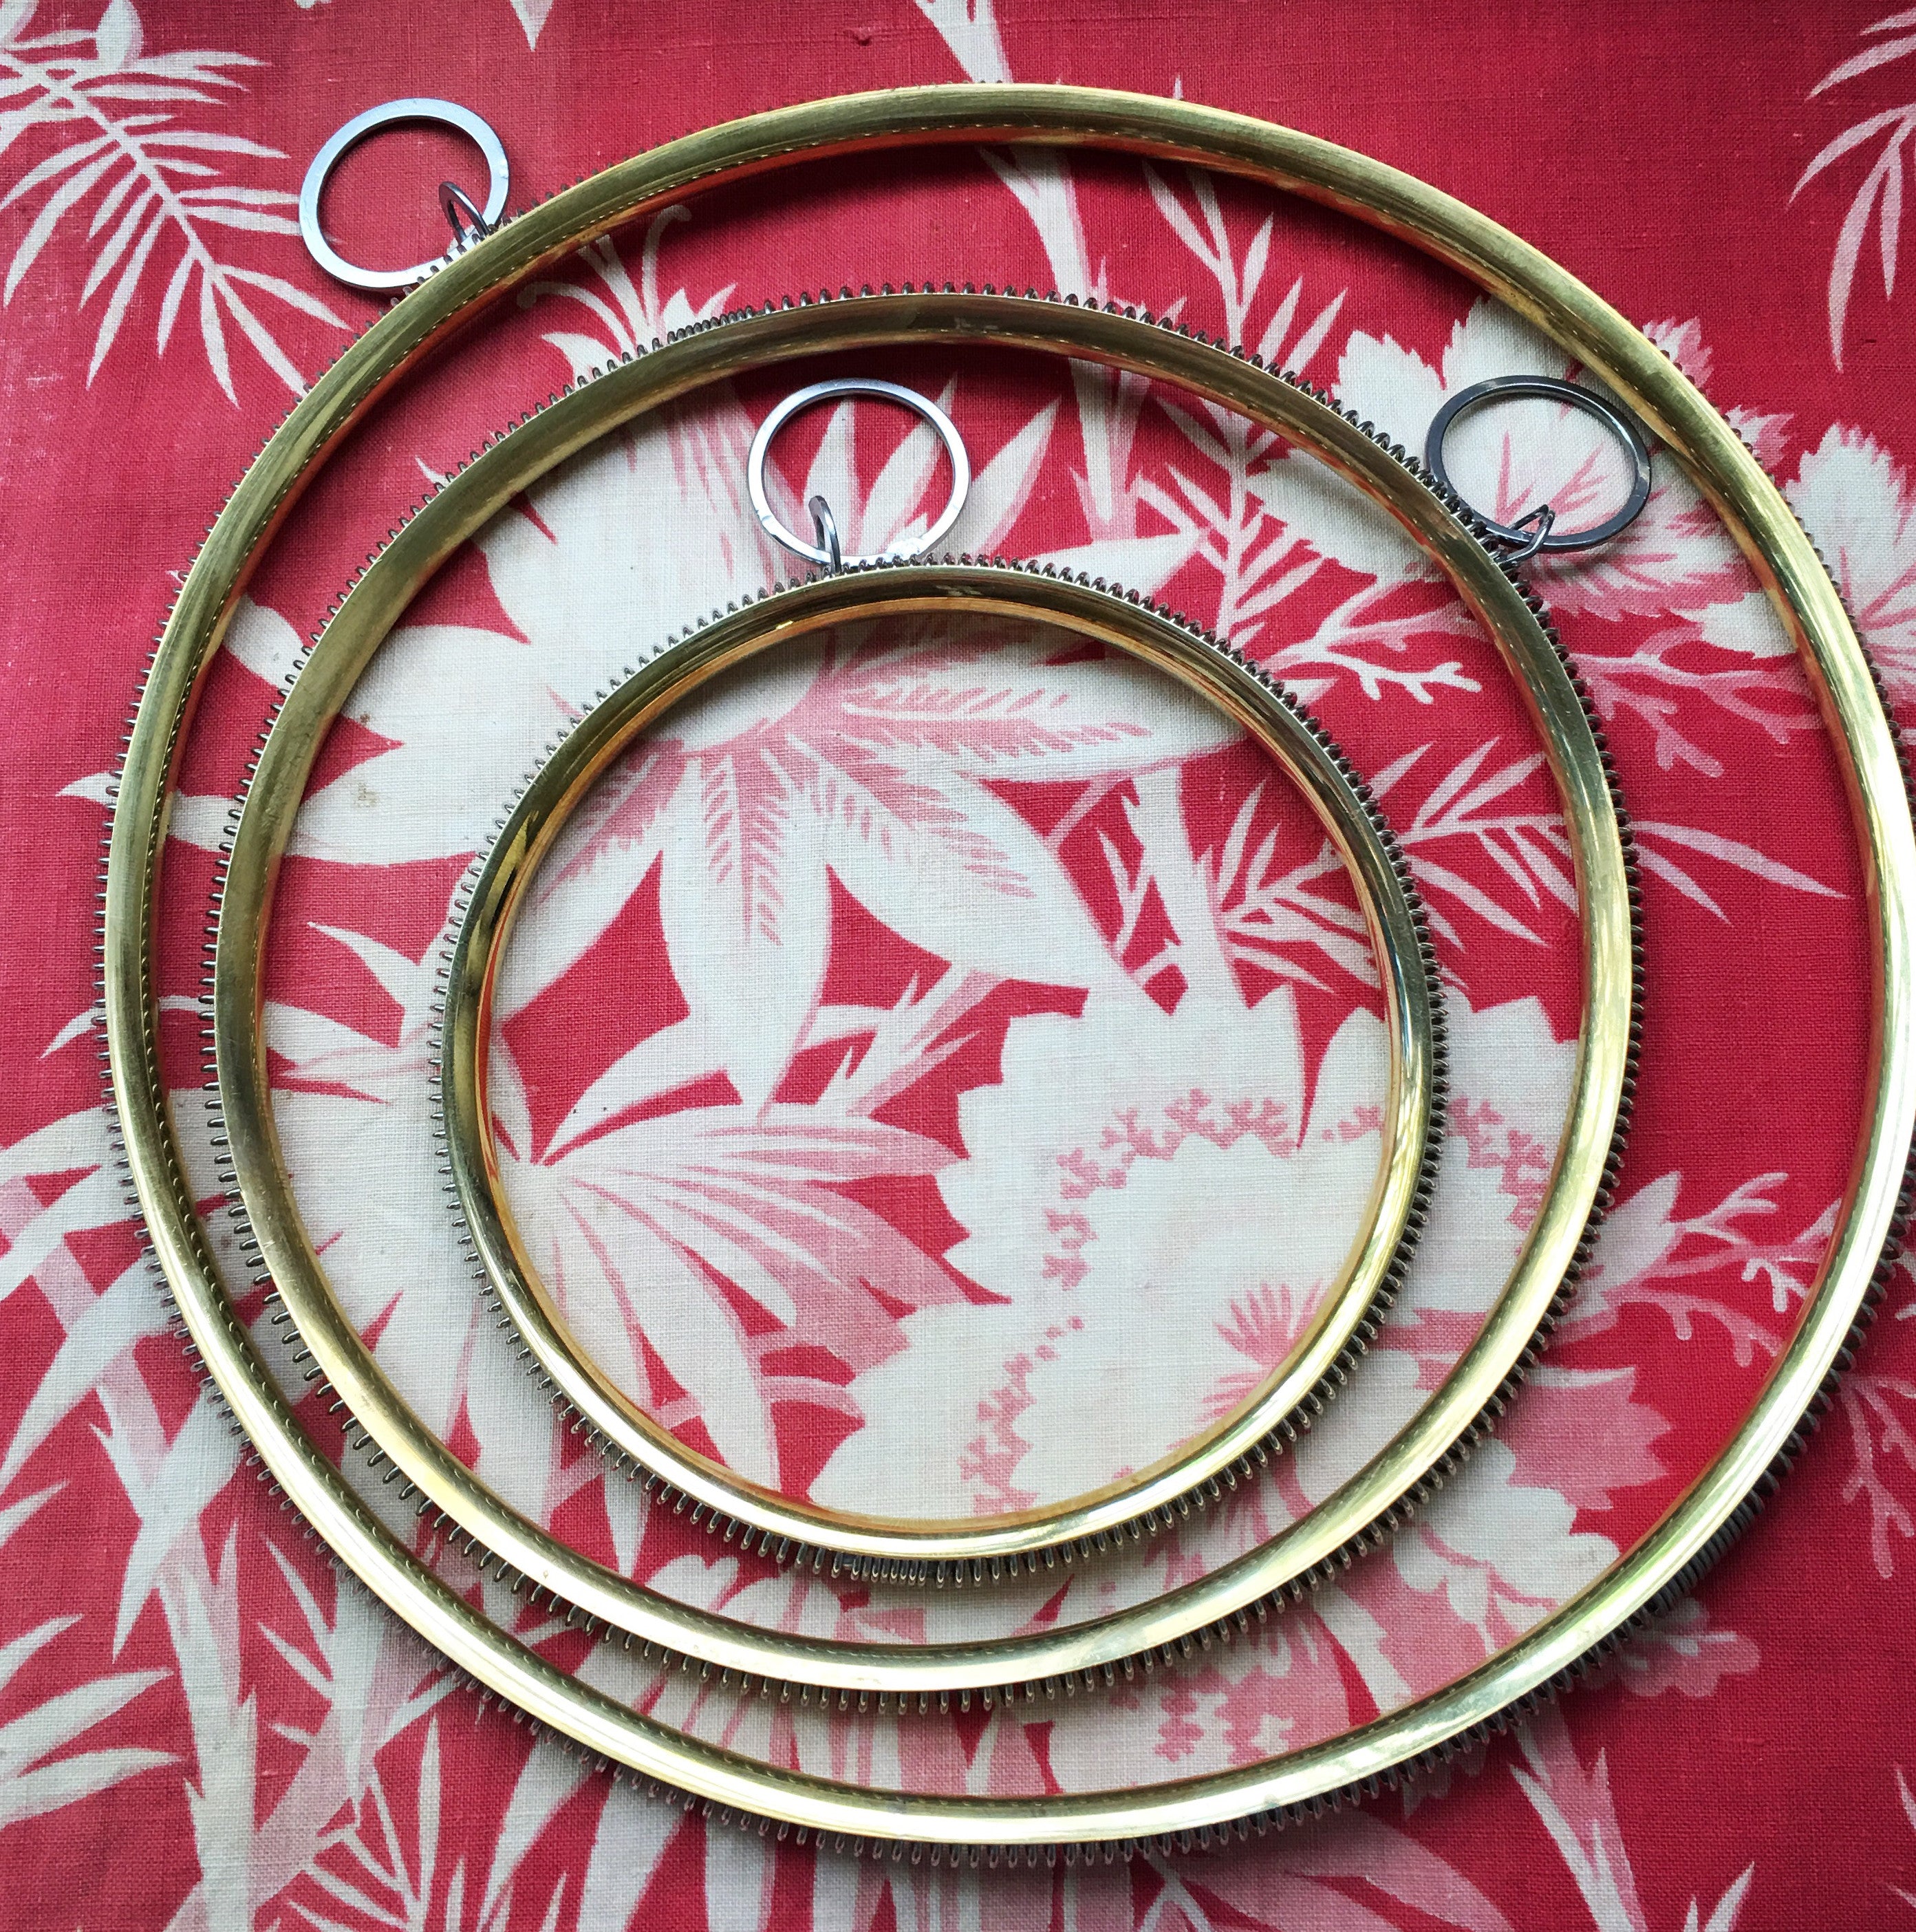 Embroidery hoops and frames - Wikipedia